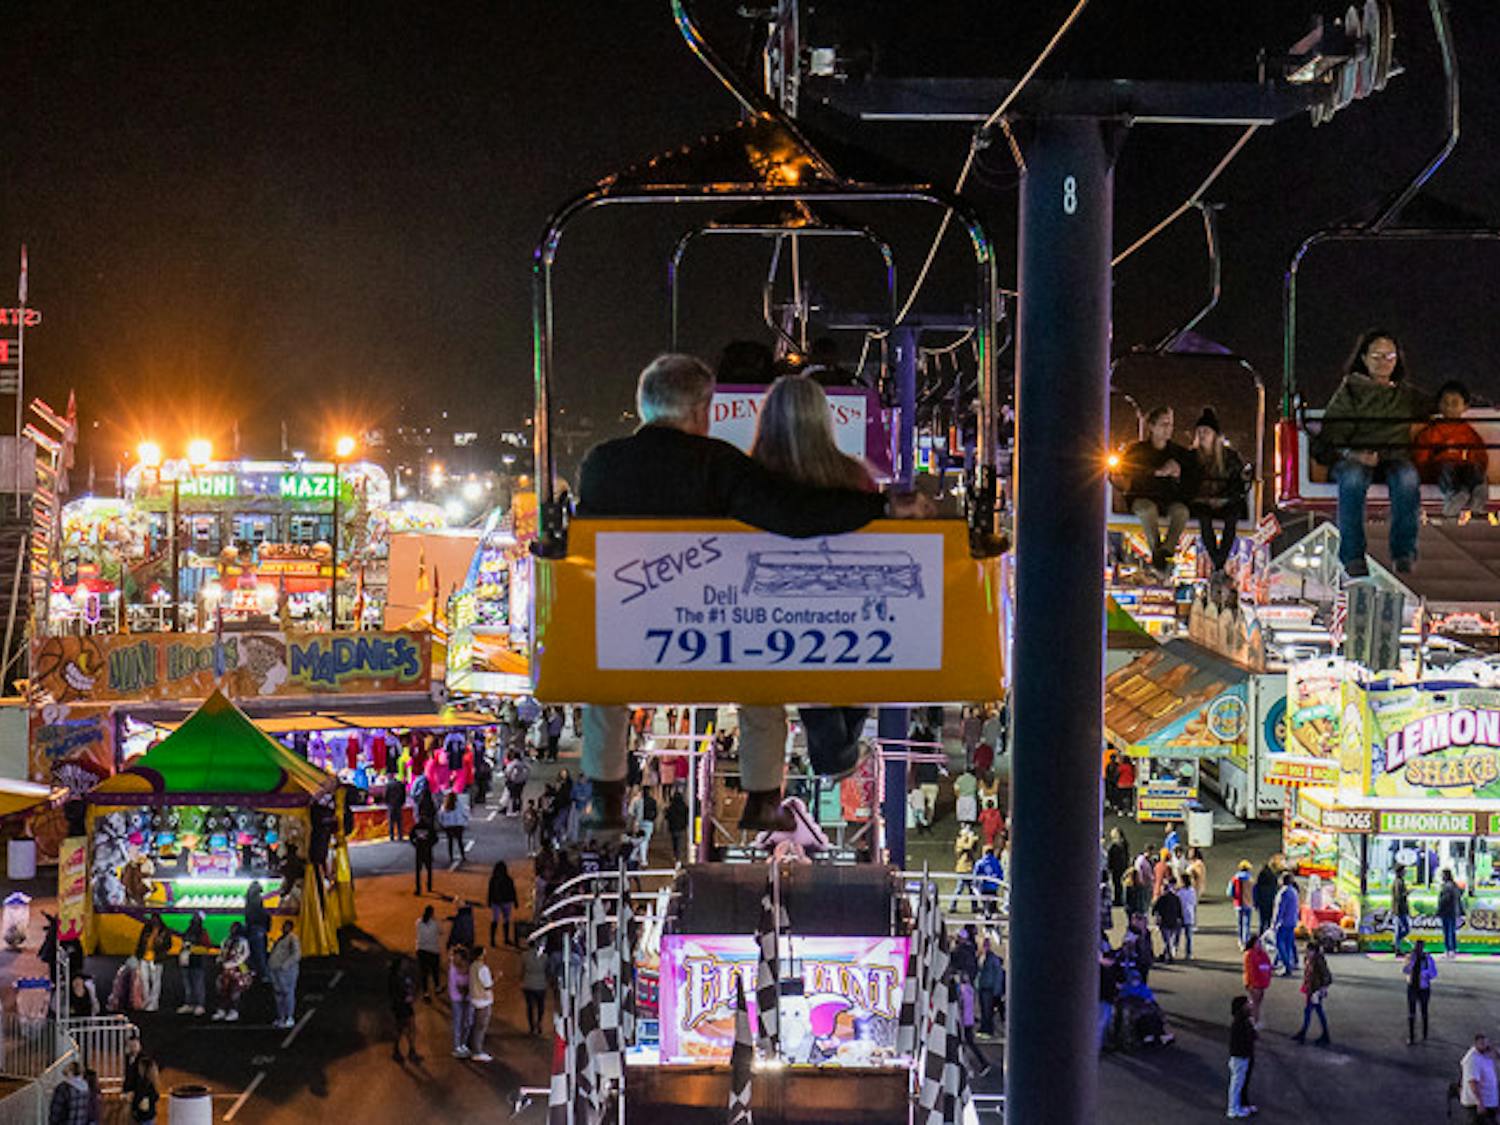 An elderly couple takes in the many lights, sounds and smells from one of the Skyride gondolas at the South Carolina State Fair on Oct. 20, 2022. The state fair took place in Columbia, S.C. from Oct. 12-23, 2022.